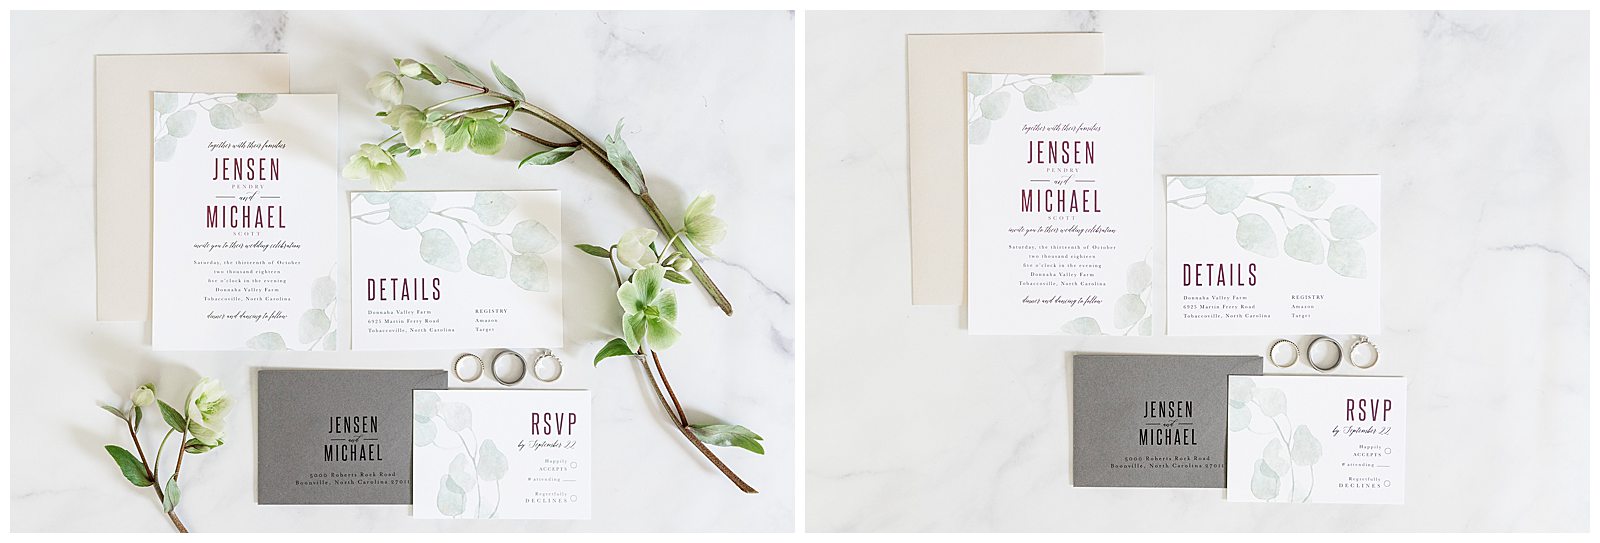 collage of wedding invitation suite by Anna Howe Design, photographed by Jenn Eddine Photography, Inc. showing with and without flowers